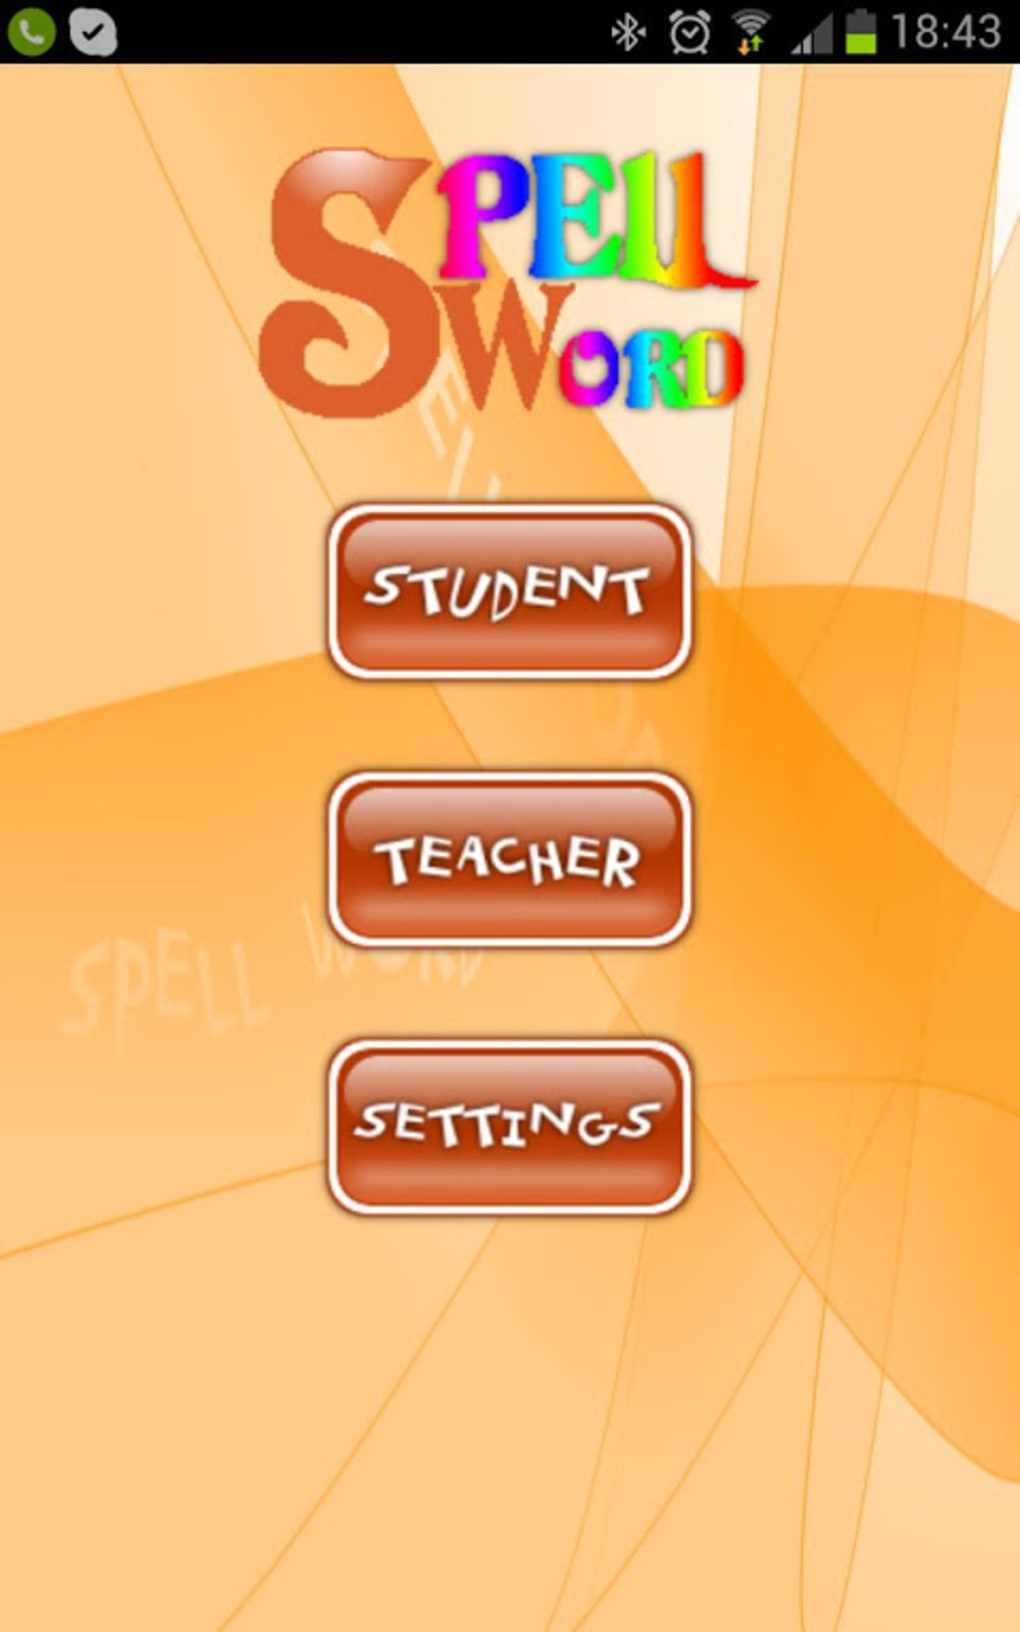 spell-word-apk-android